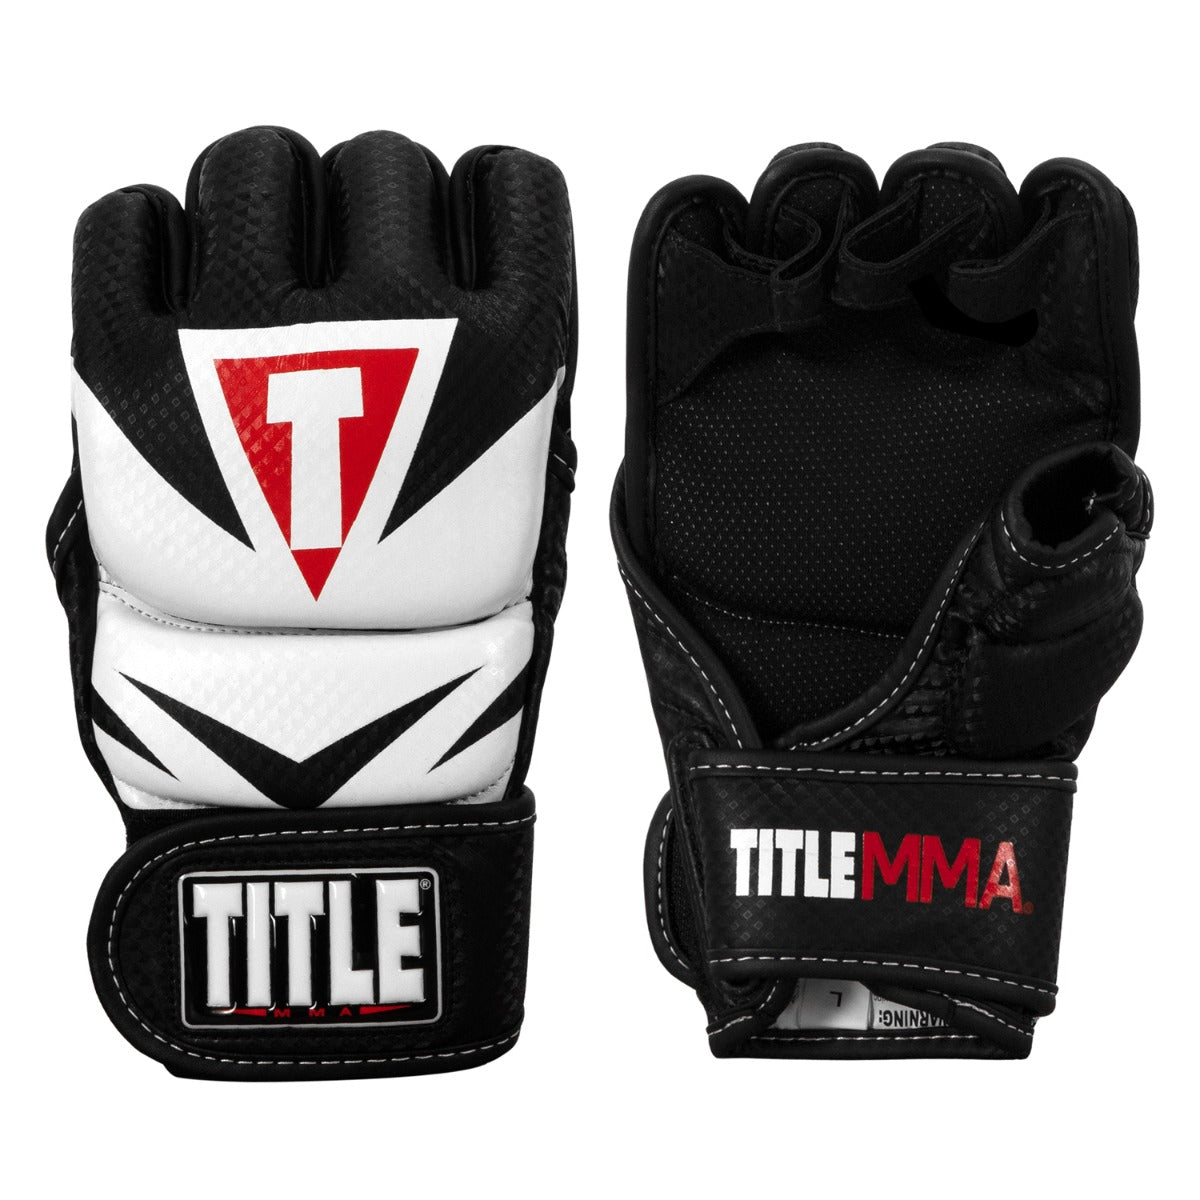 TITLE MMA Command Training Gloves